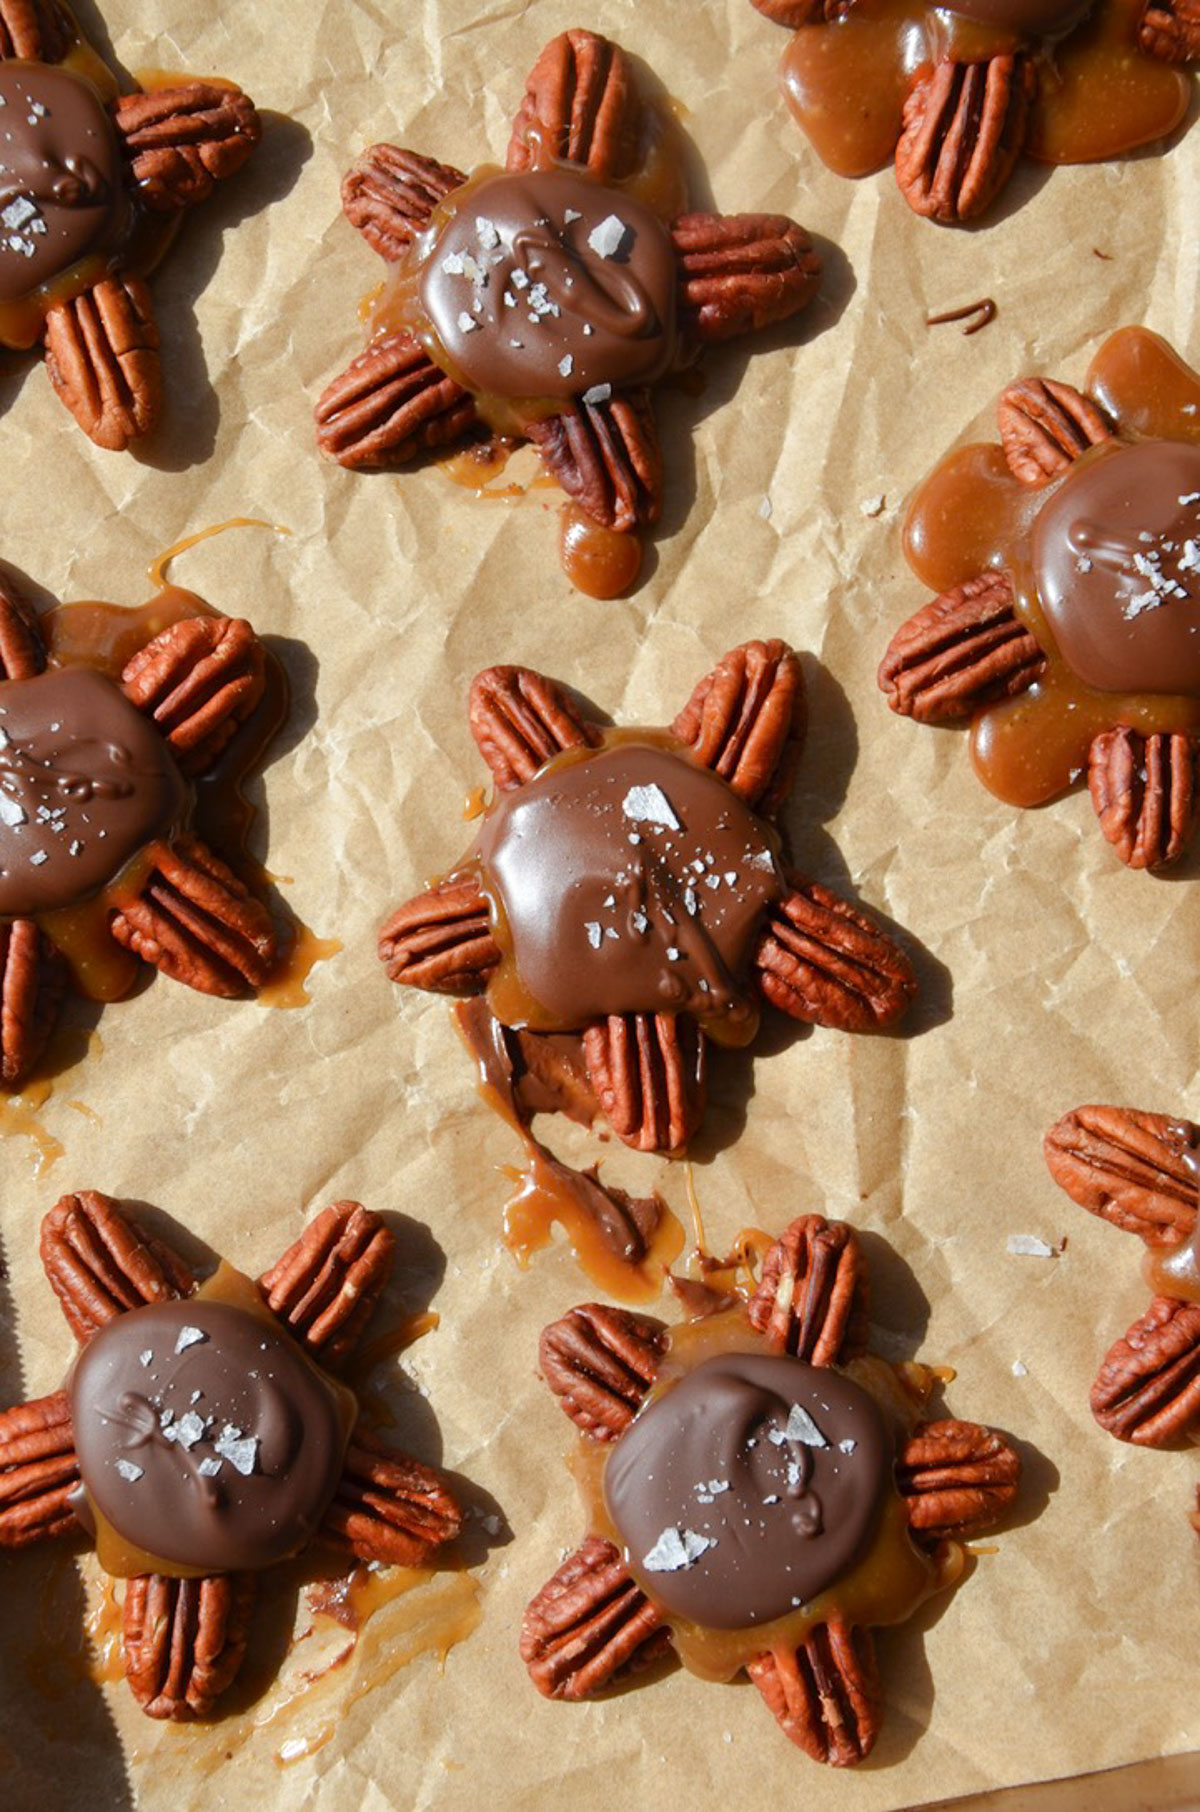 Chocolate pecan turtle clusters on a baking tray.